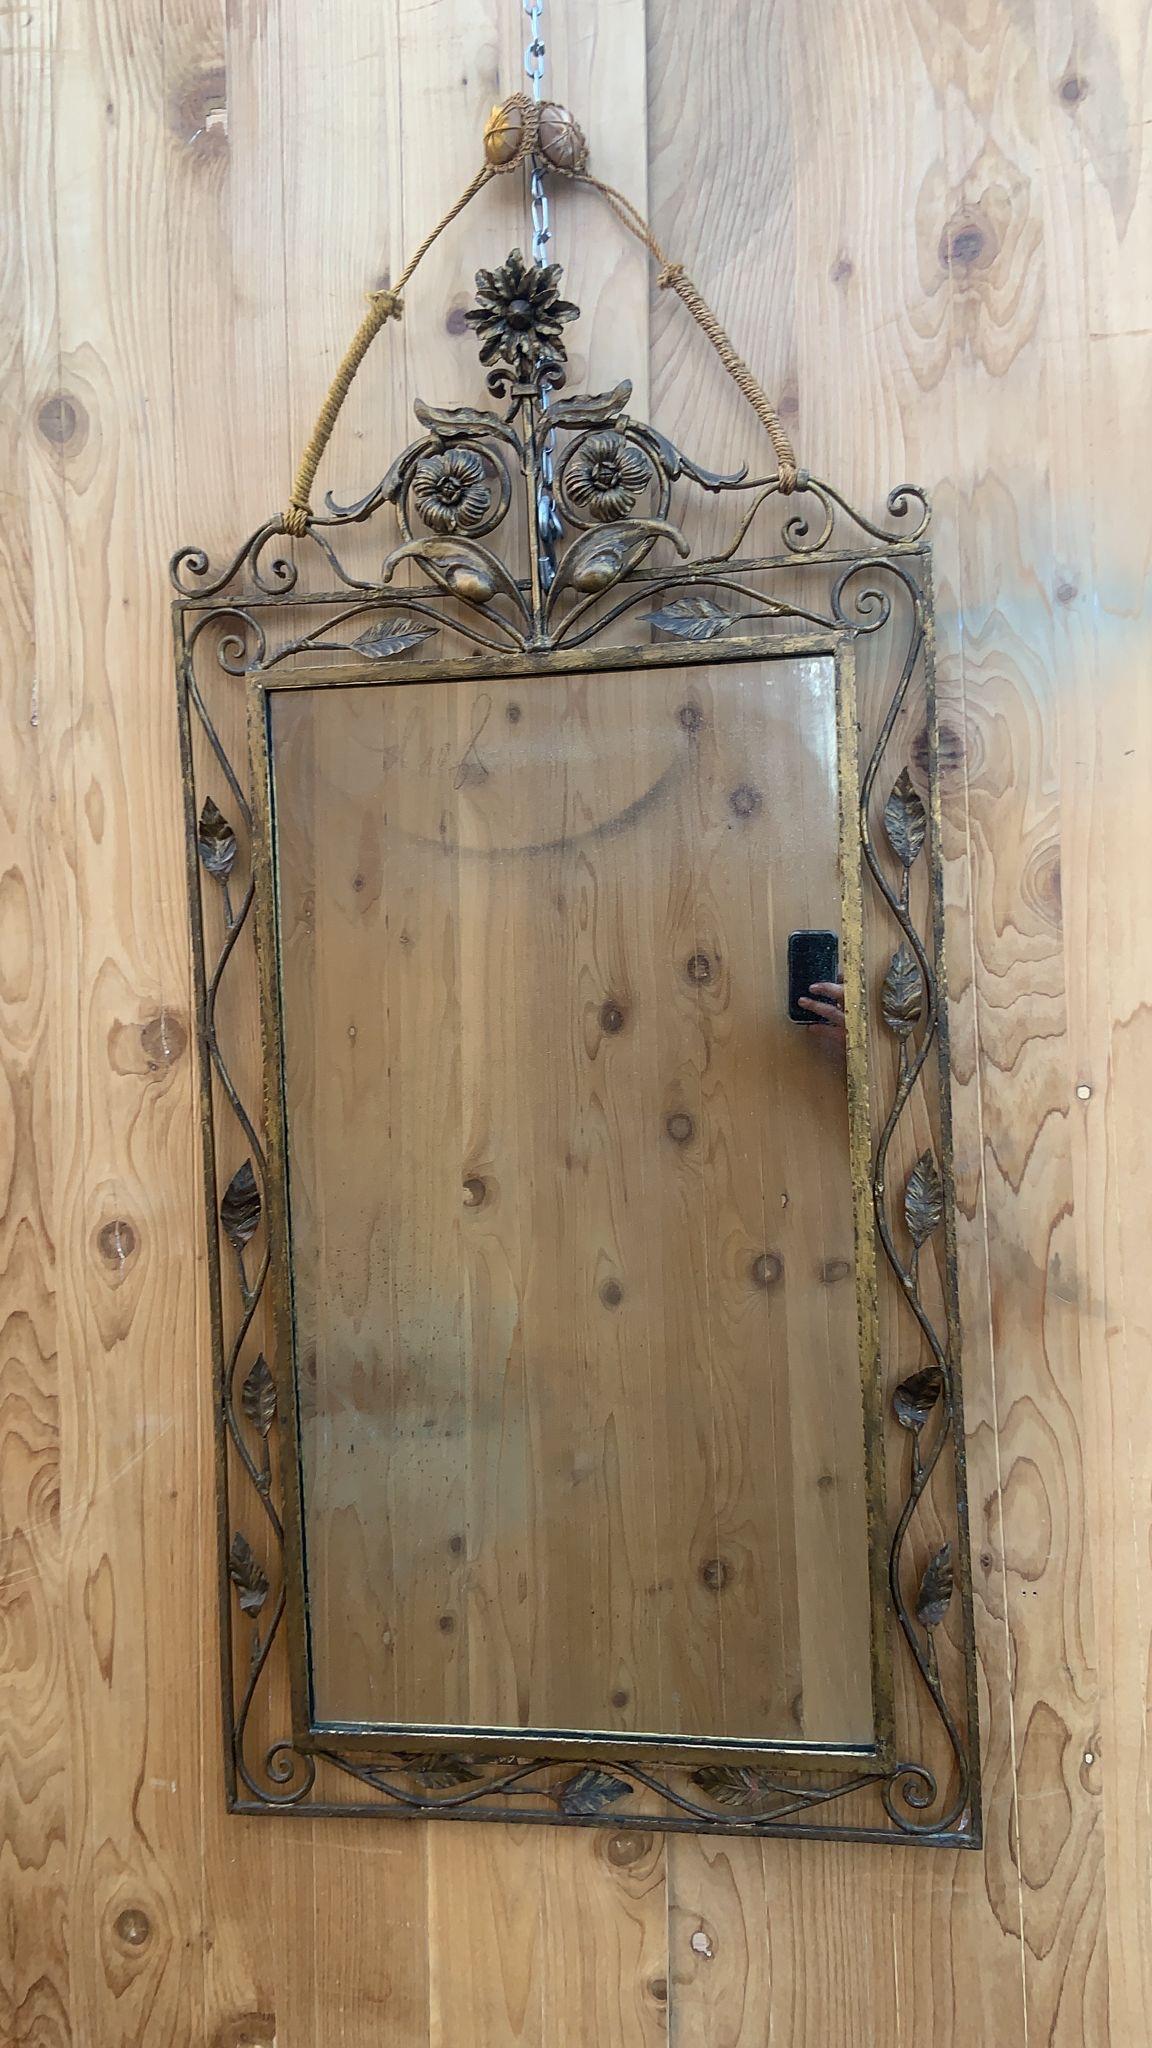 Vintage Italian Style Forged and Gilded Floral Wall Mirror 

This is a beautiful rectangular Italian mirror with floral and leaf design. It would be a statement in a foyer, bathroom bedroom or living room. 

Circa 1930

Dimensions:
H 50”
W 25”
D 2”
